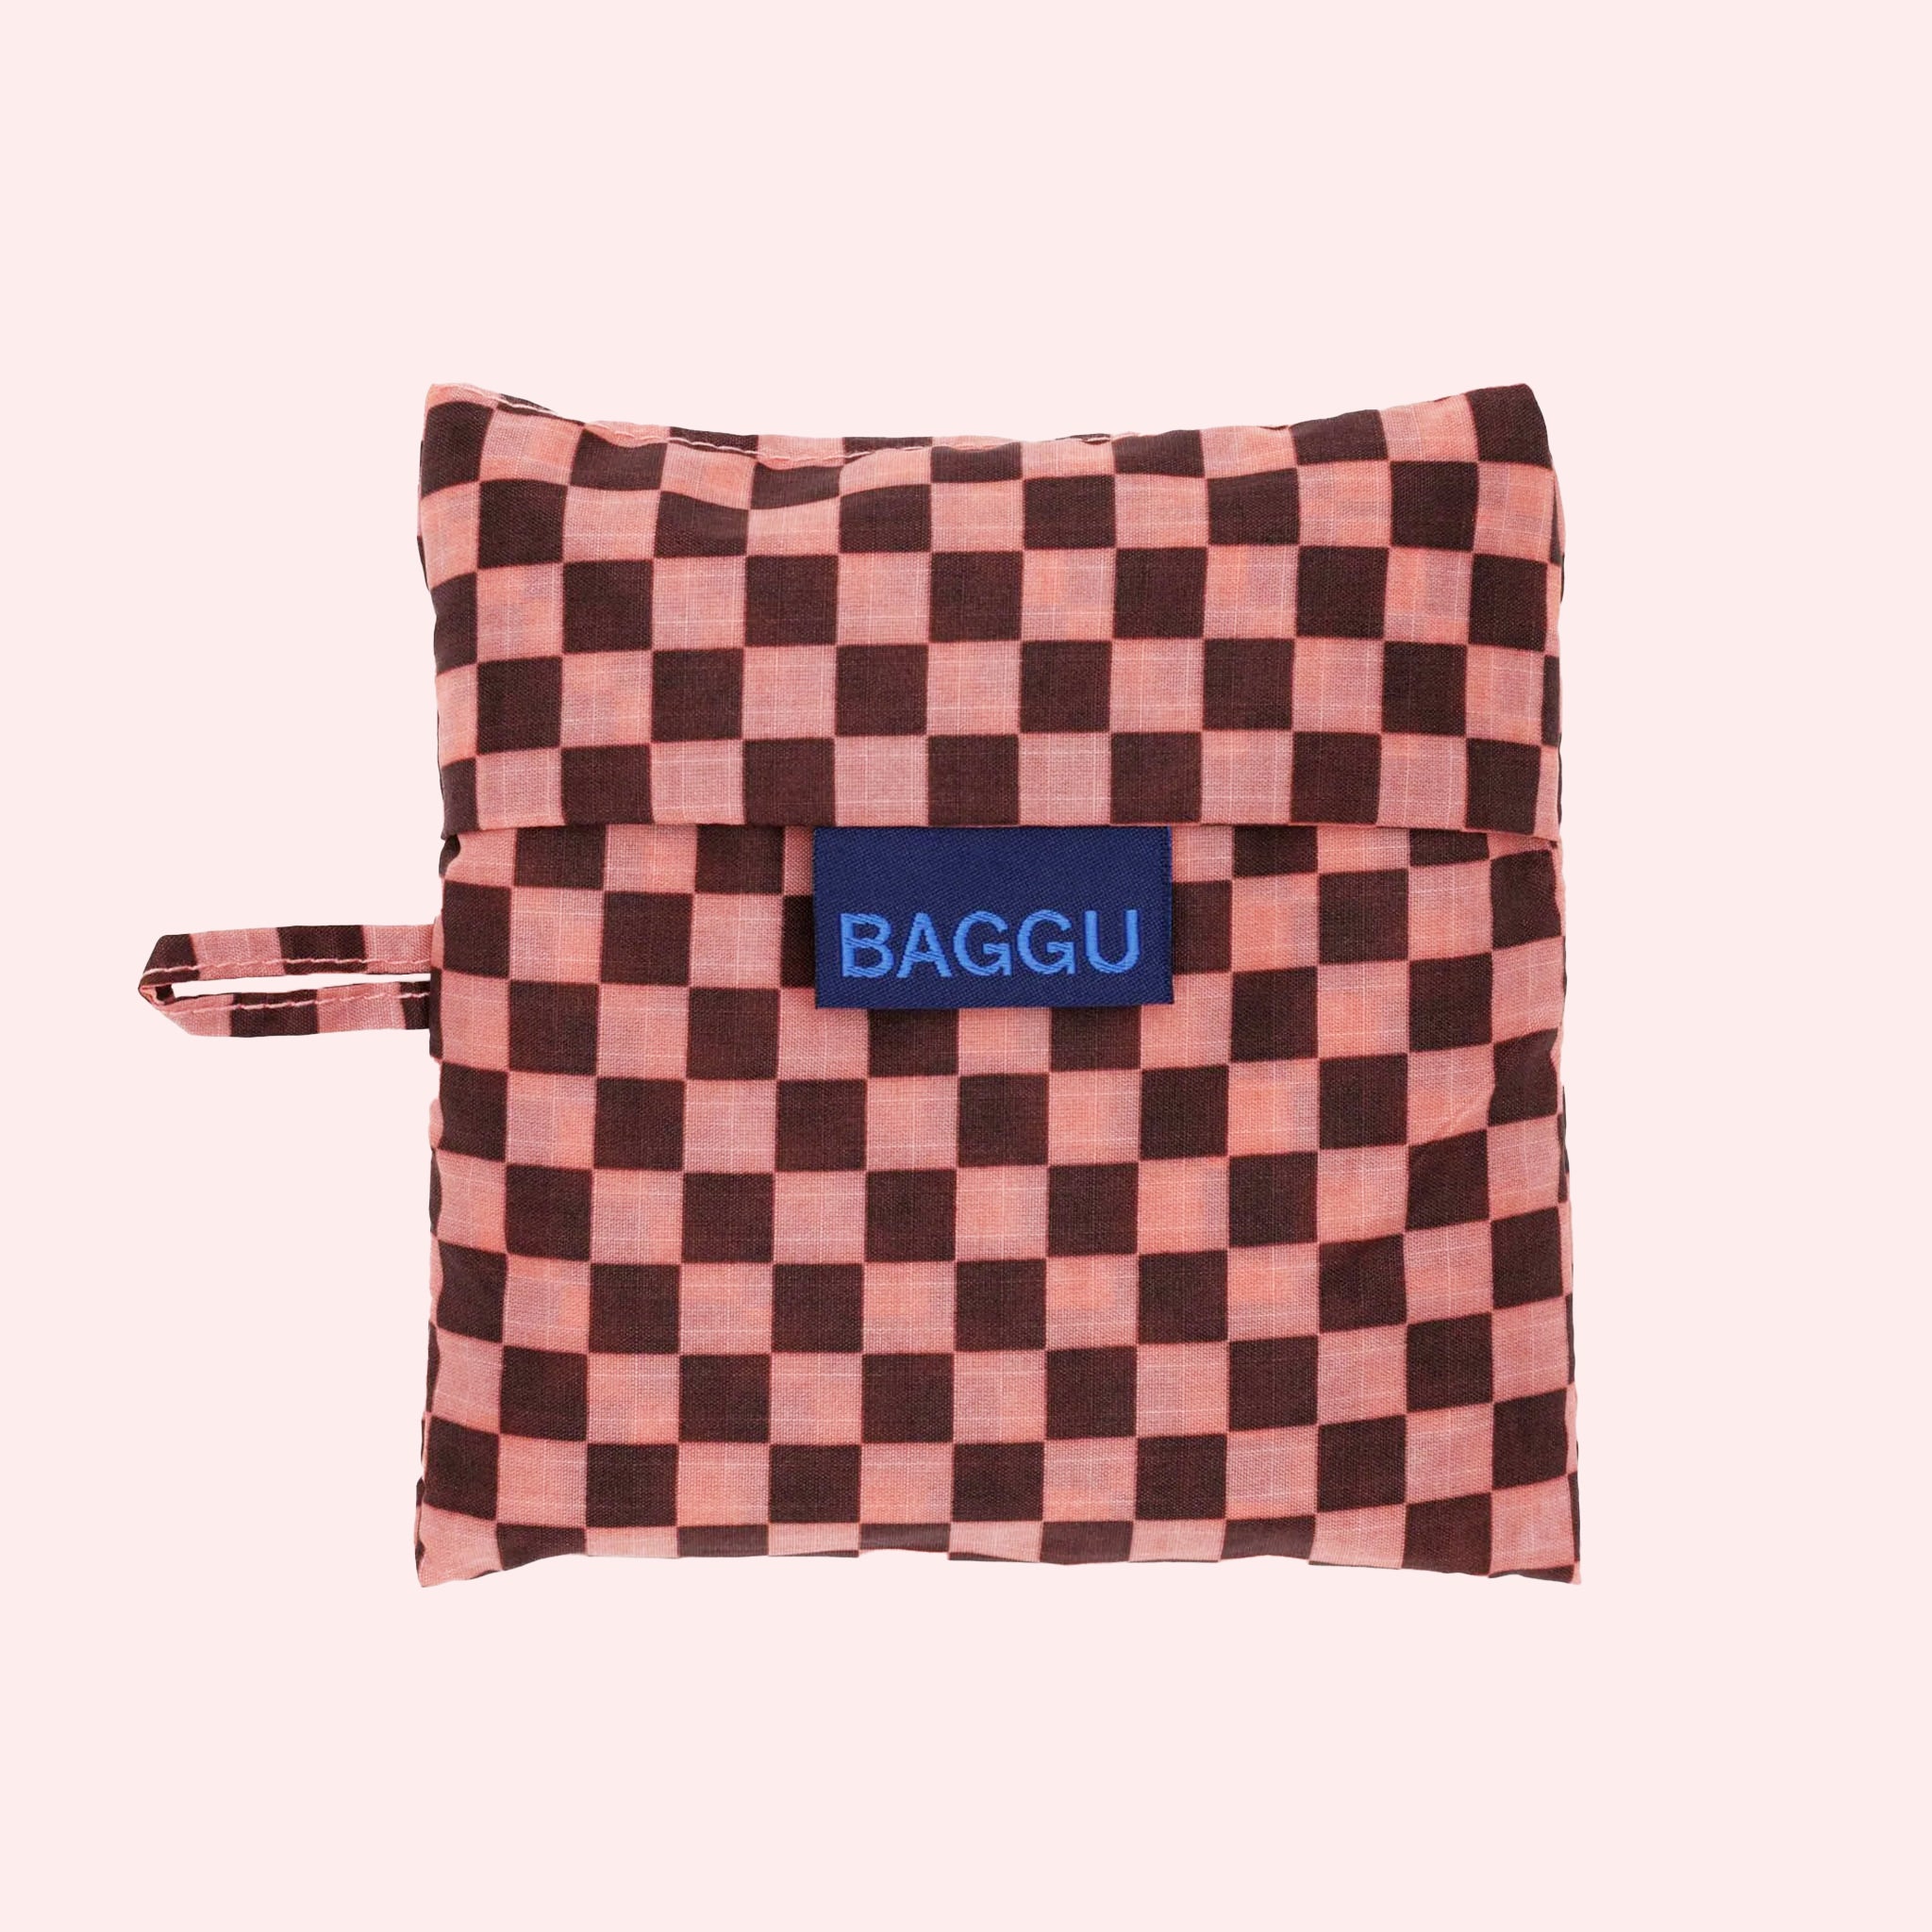 A pink and brown checker print nylon tote bag that has the option to be folded into a compact square for on the go. 